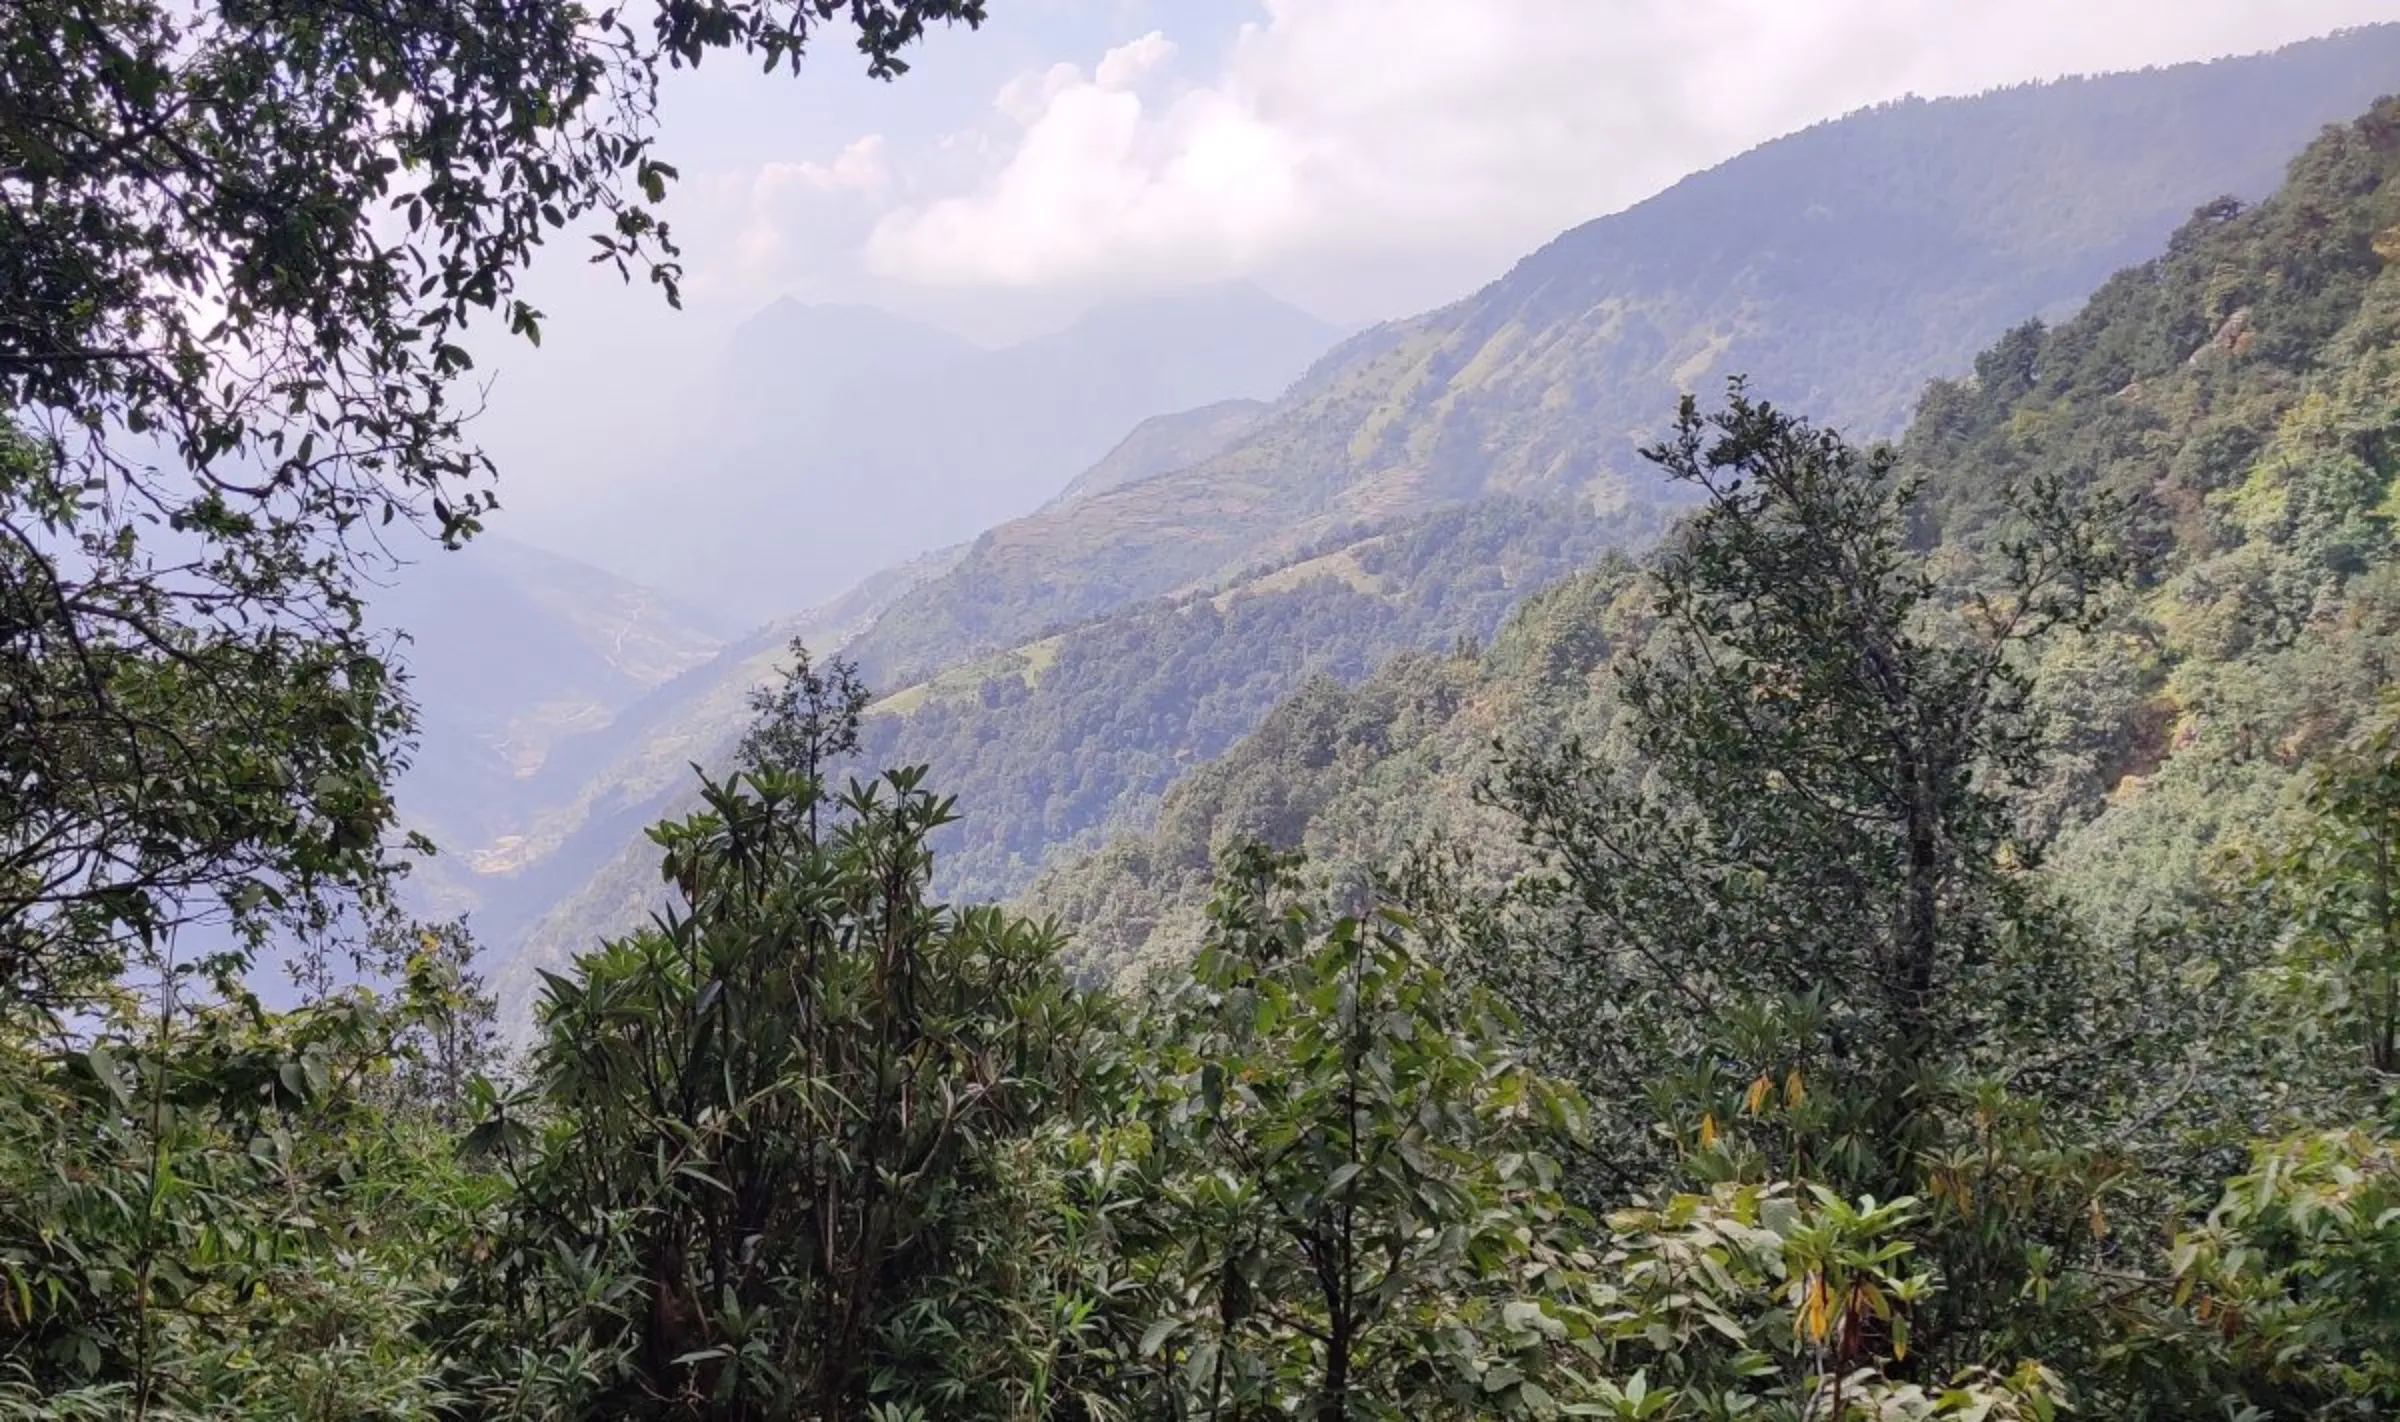 Nepal’s mid-hill forest at Doti district western part of Nepal. October 6, 2020